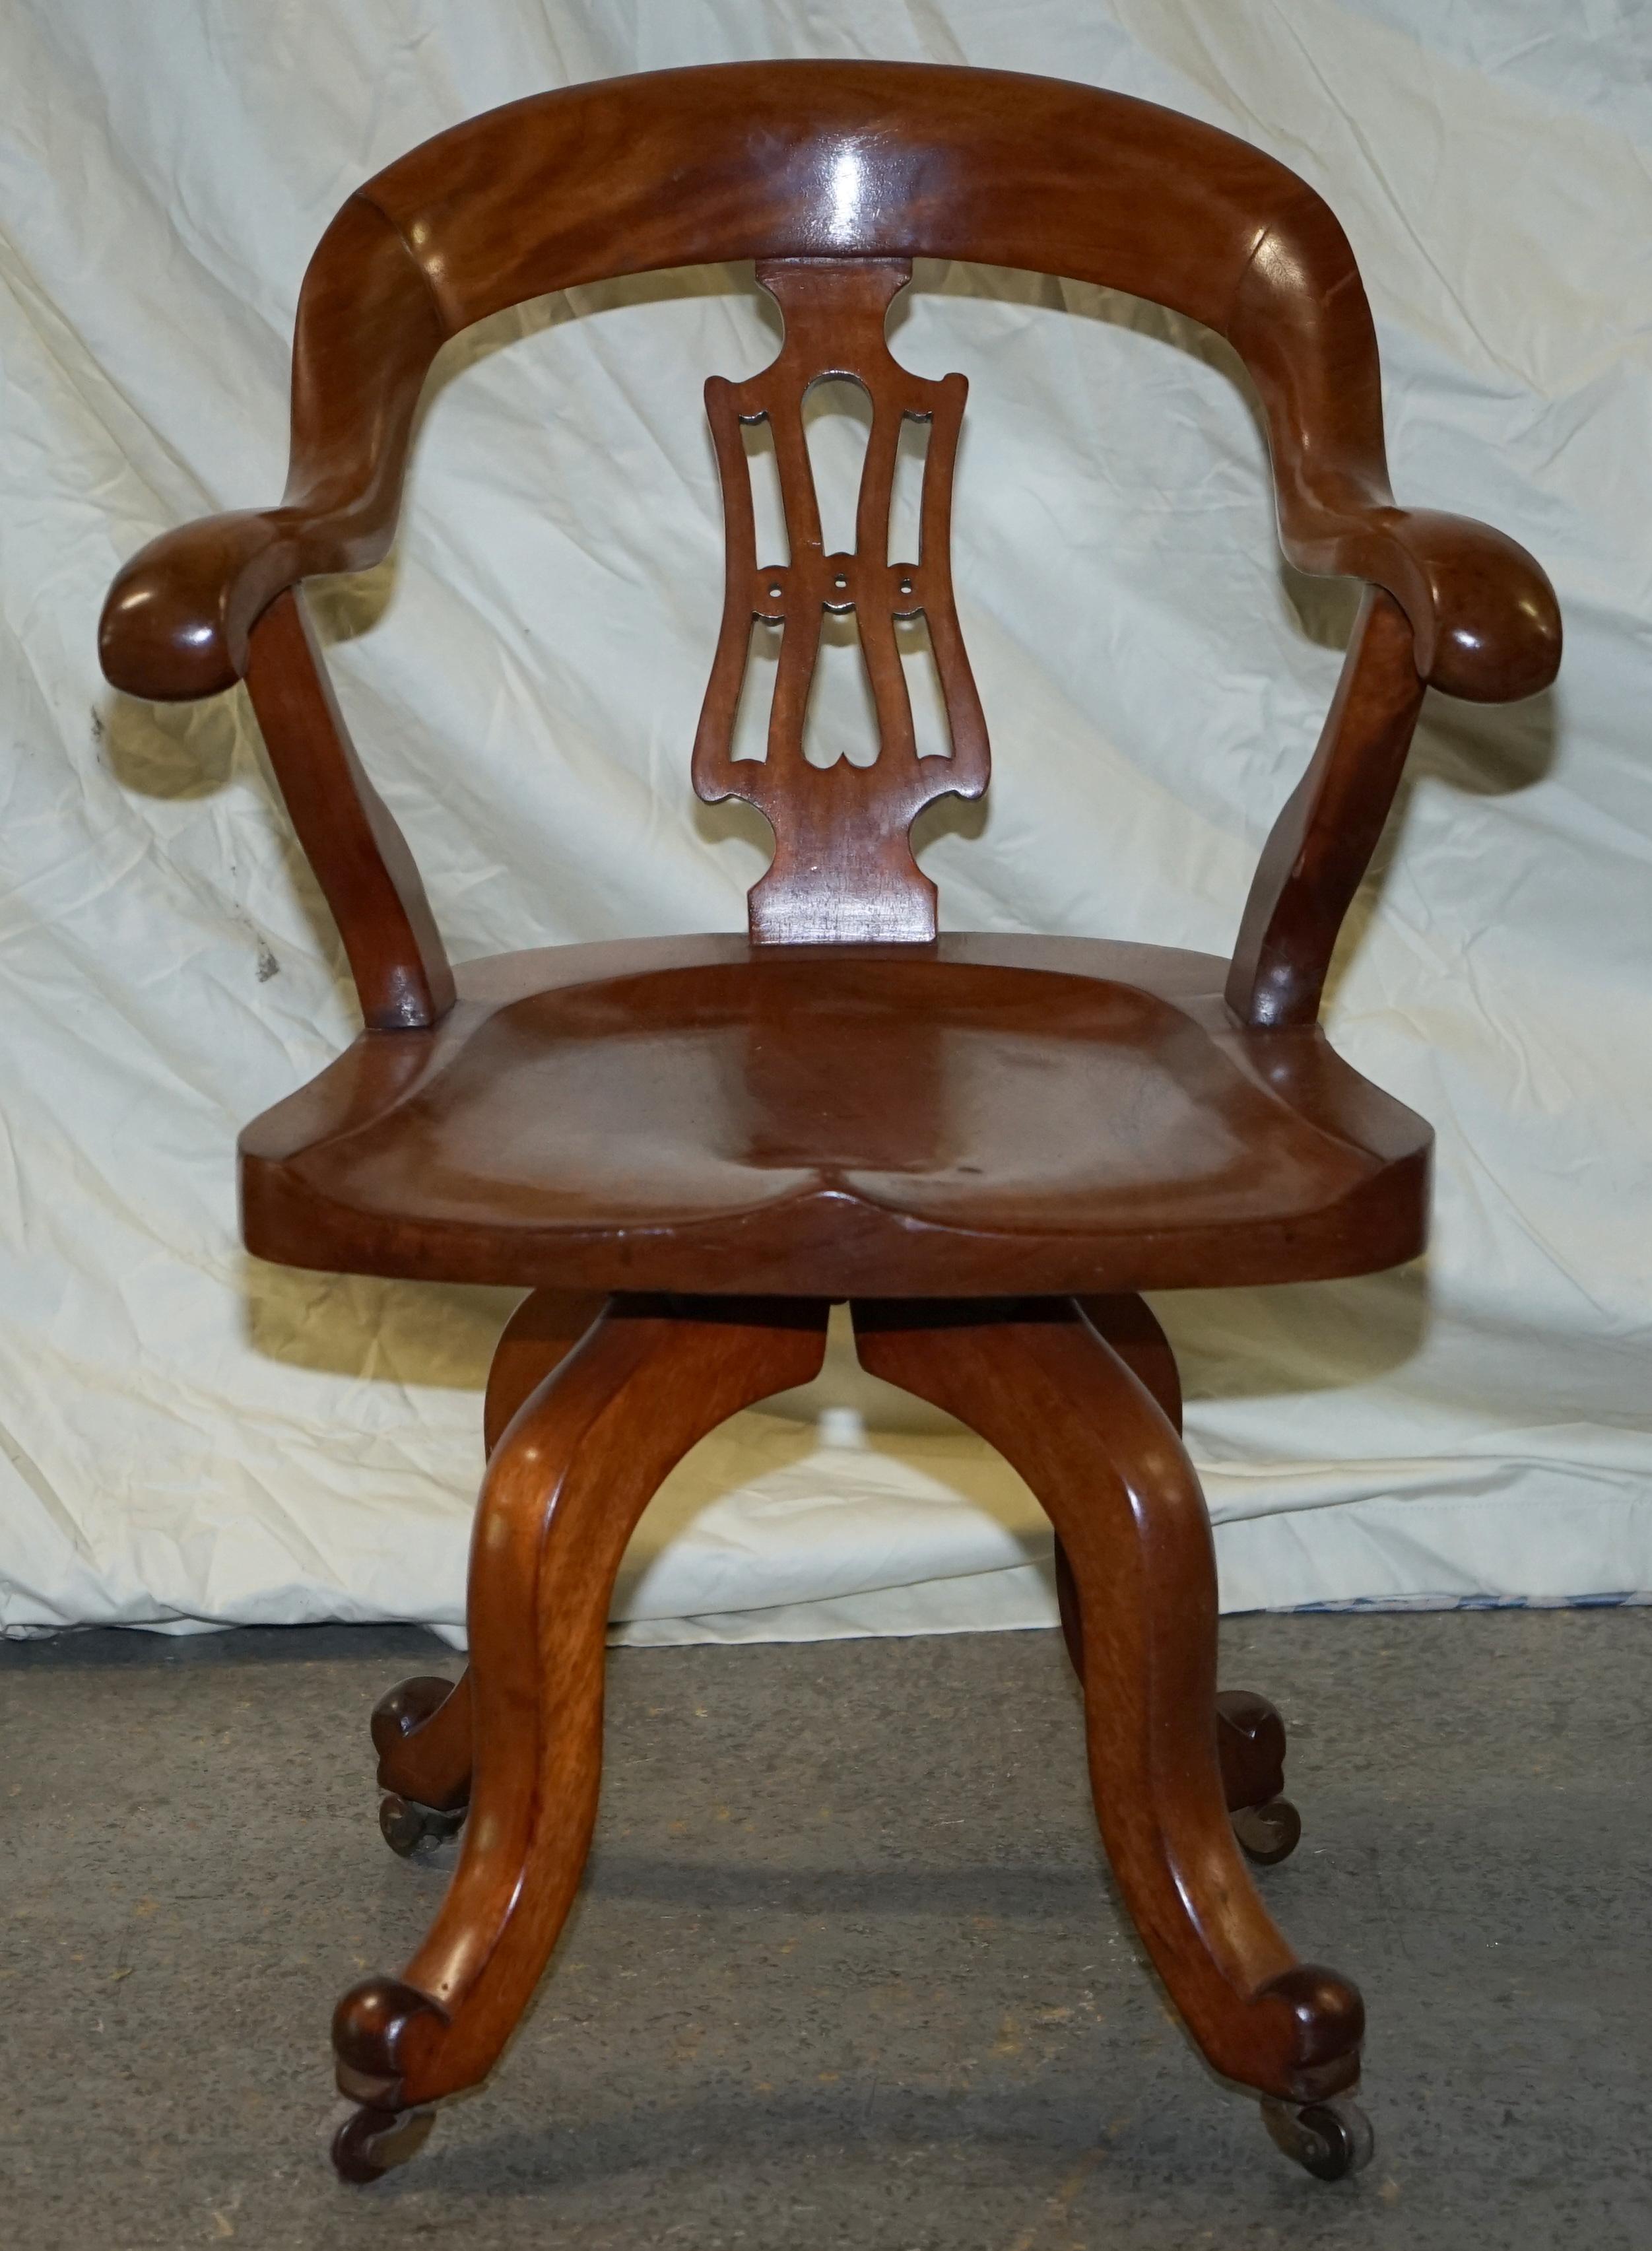 We are delighted to offer for sale this stunning original circa 1860 solid walnut Victorian captains chair with sculptural frame

A very original and good looking piece, the arms are highly sculpted and are very comfortable for a solid wood chair.